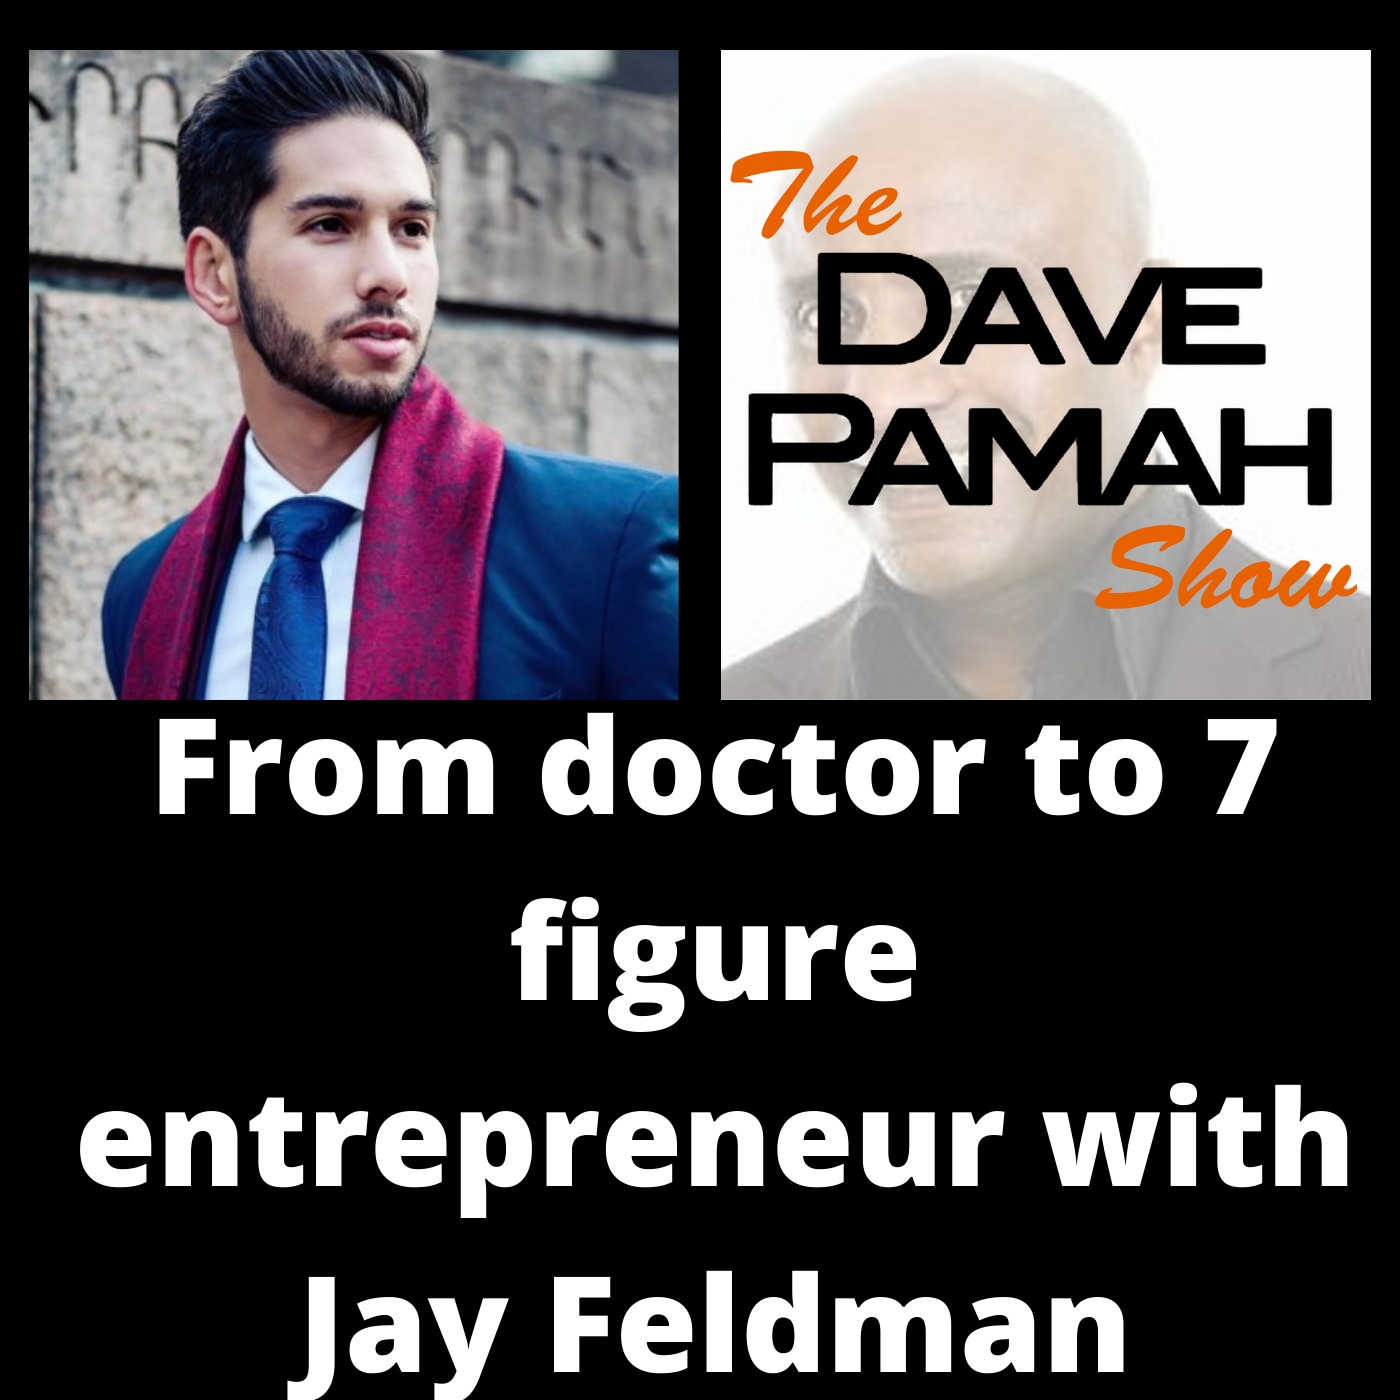 From doctor to 7 figure entrepreneur with Jay Feldman